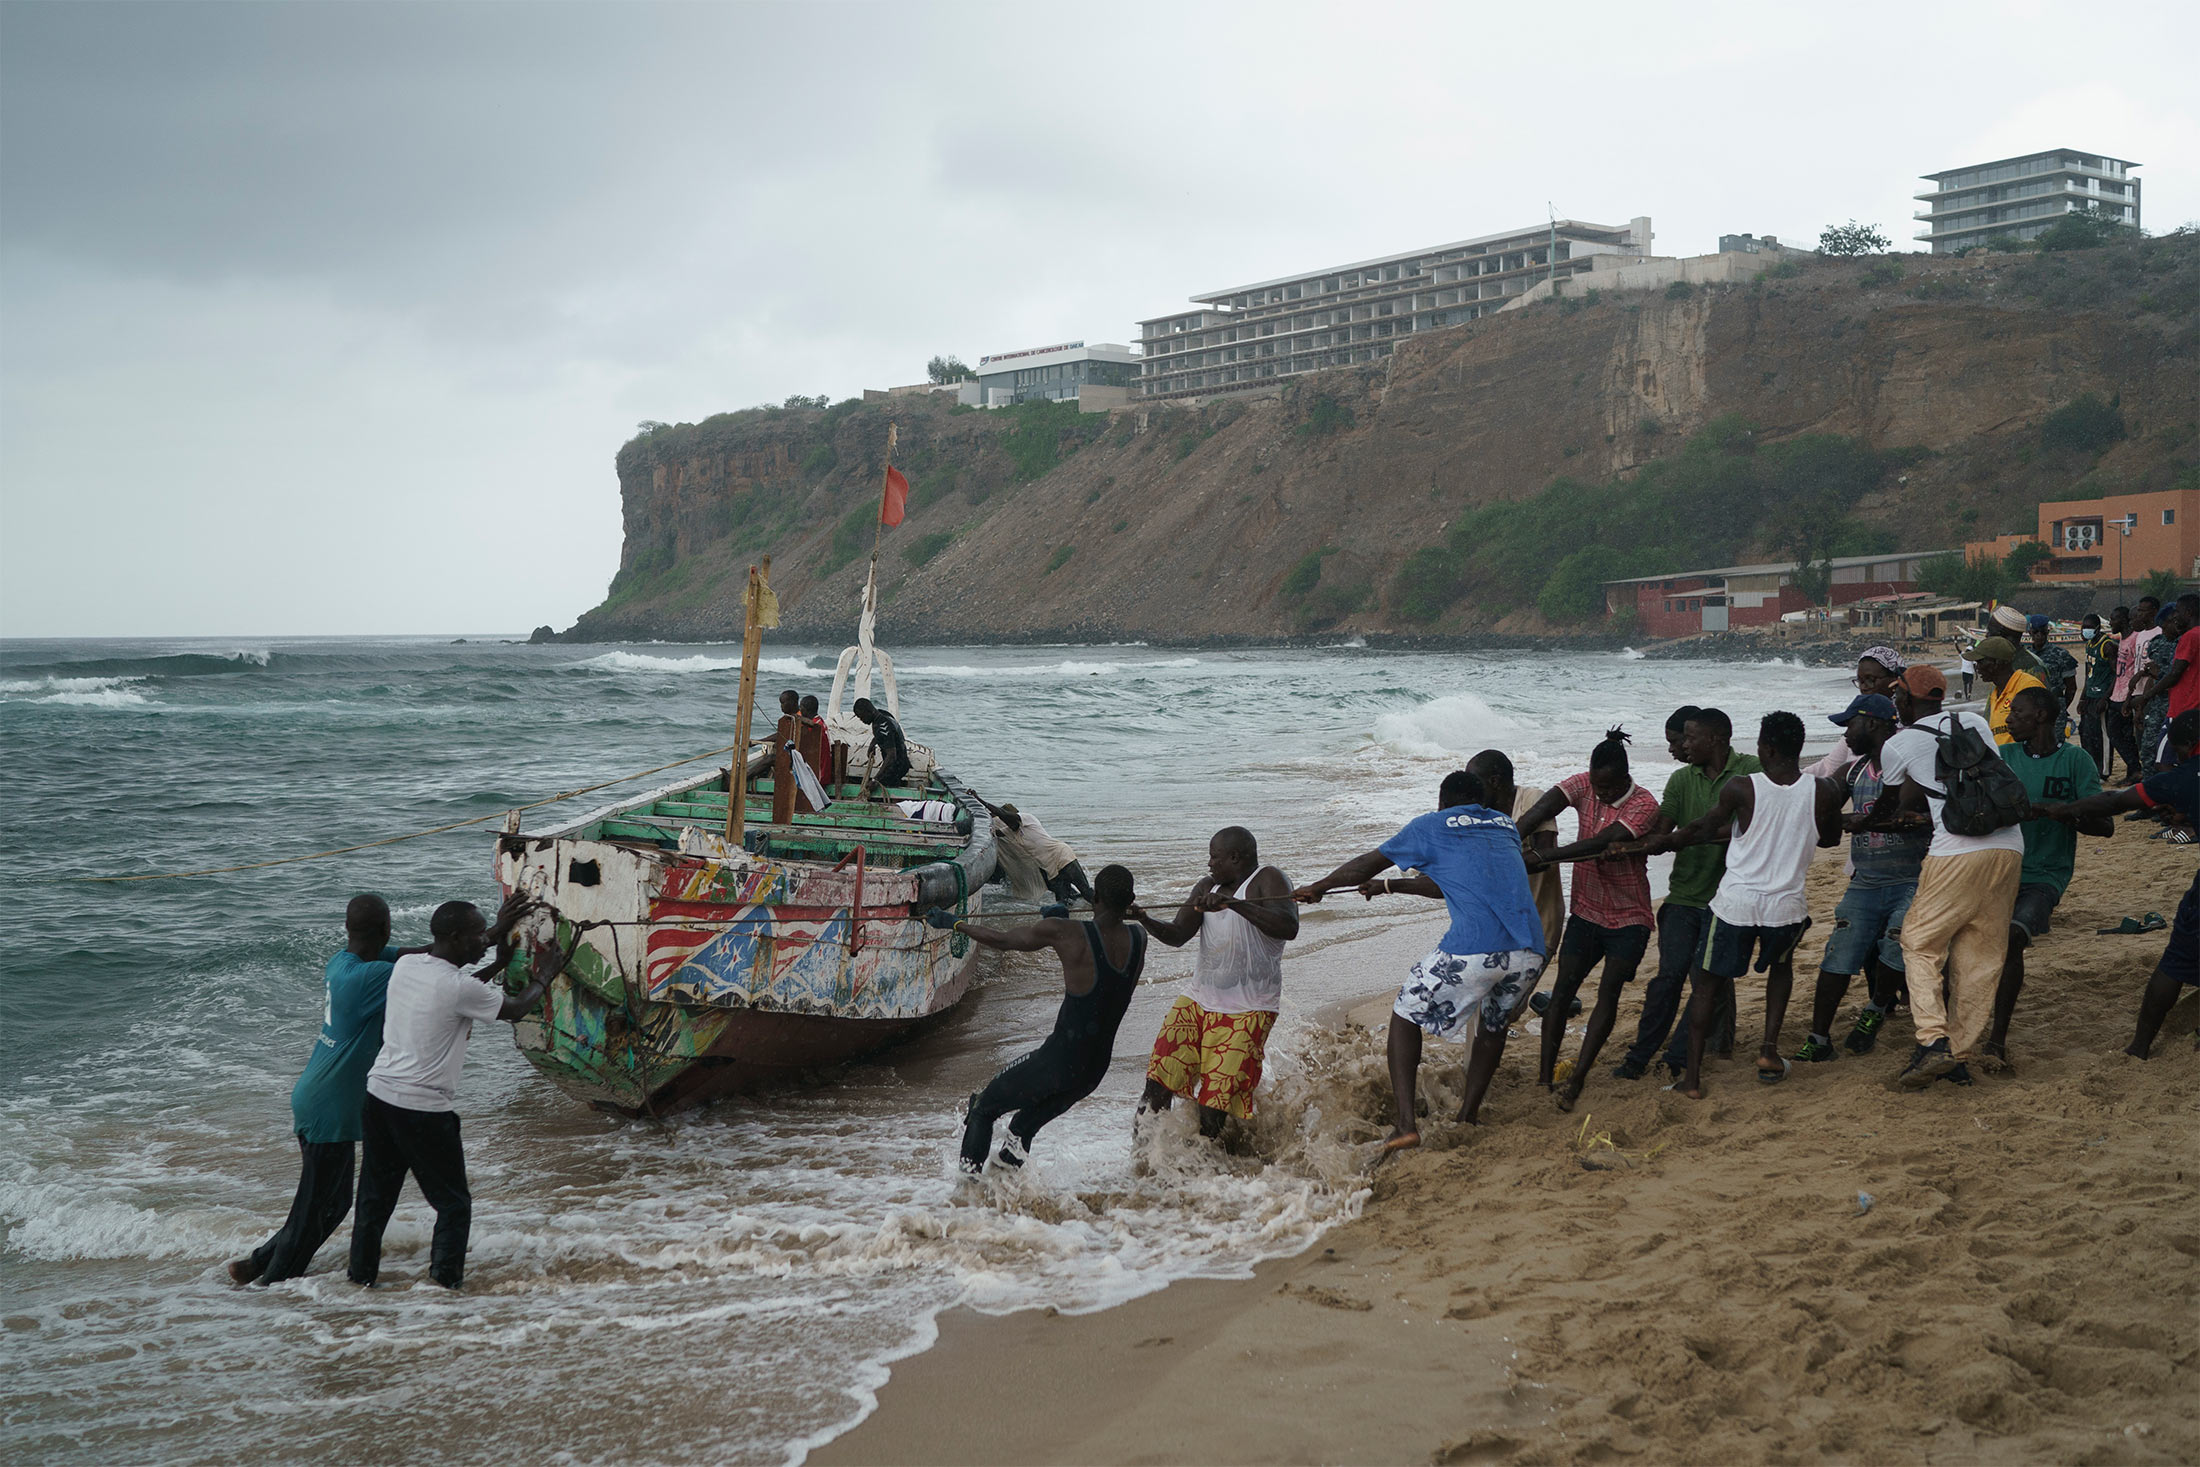 Places you Must Visit While in Senegal! - SENEGAL SHUTTLE